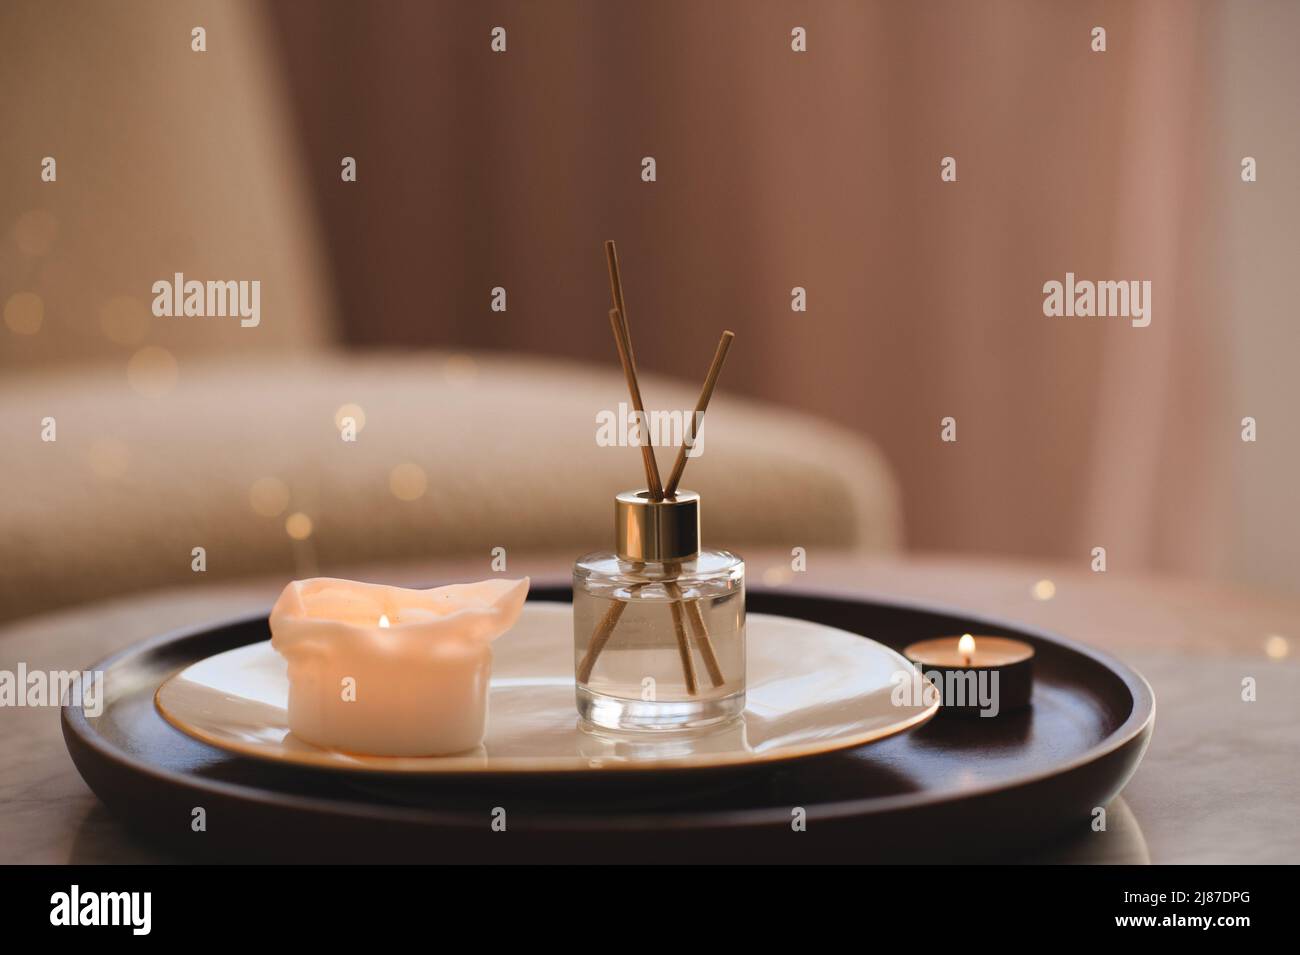 Liquid home perfume in glass bottle with bamboo sticks with scented candle on plate on wooden tray on coffee table in bedroom close up. Stock Photo